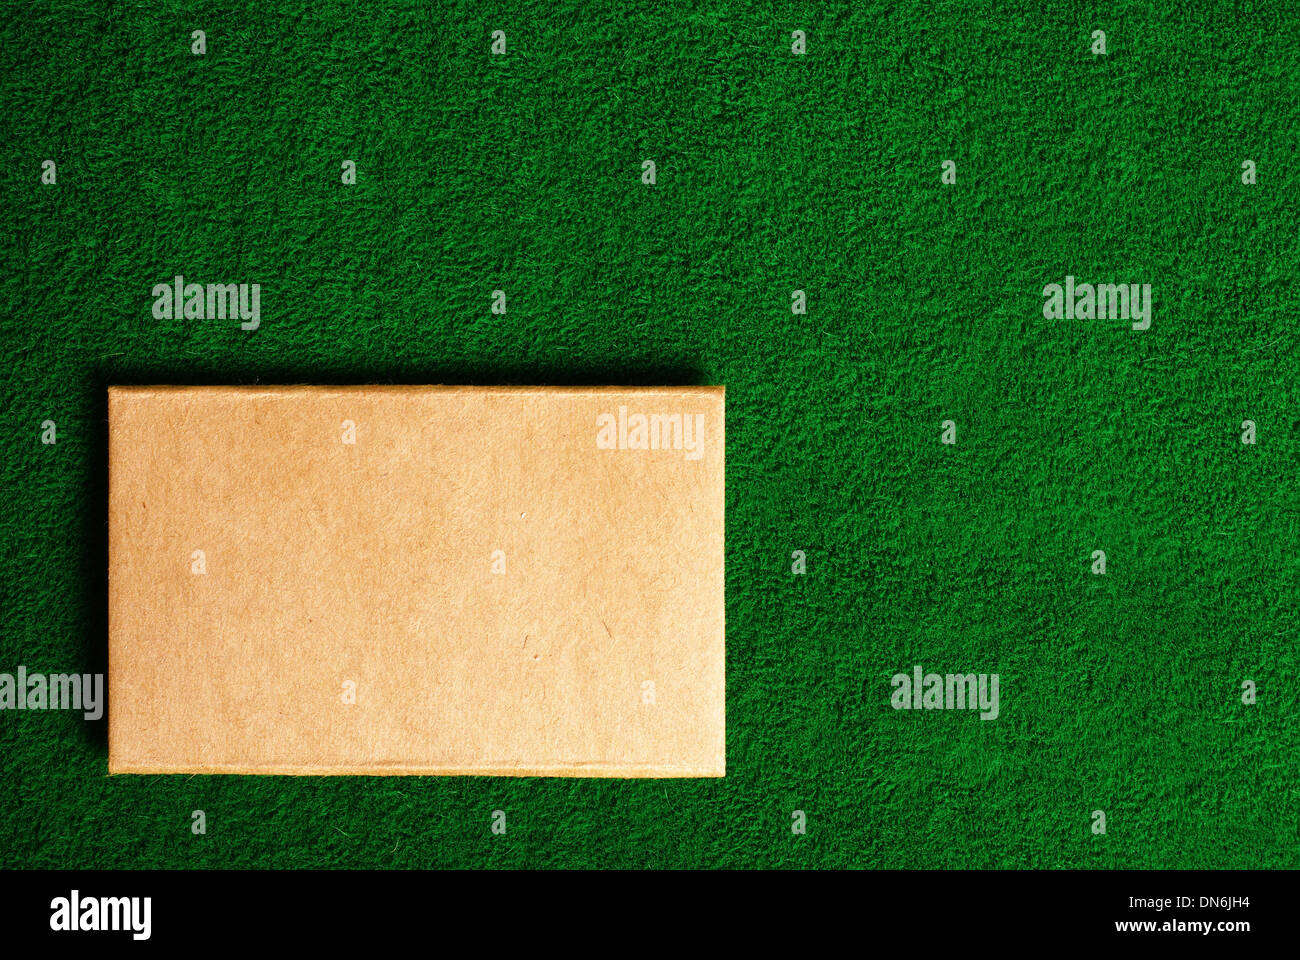 cardboard note on green grass background Stock Photo